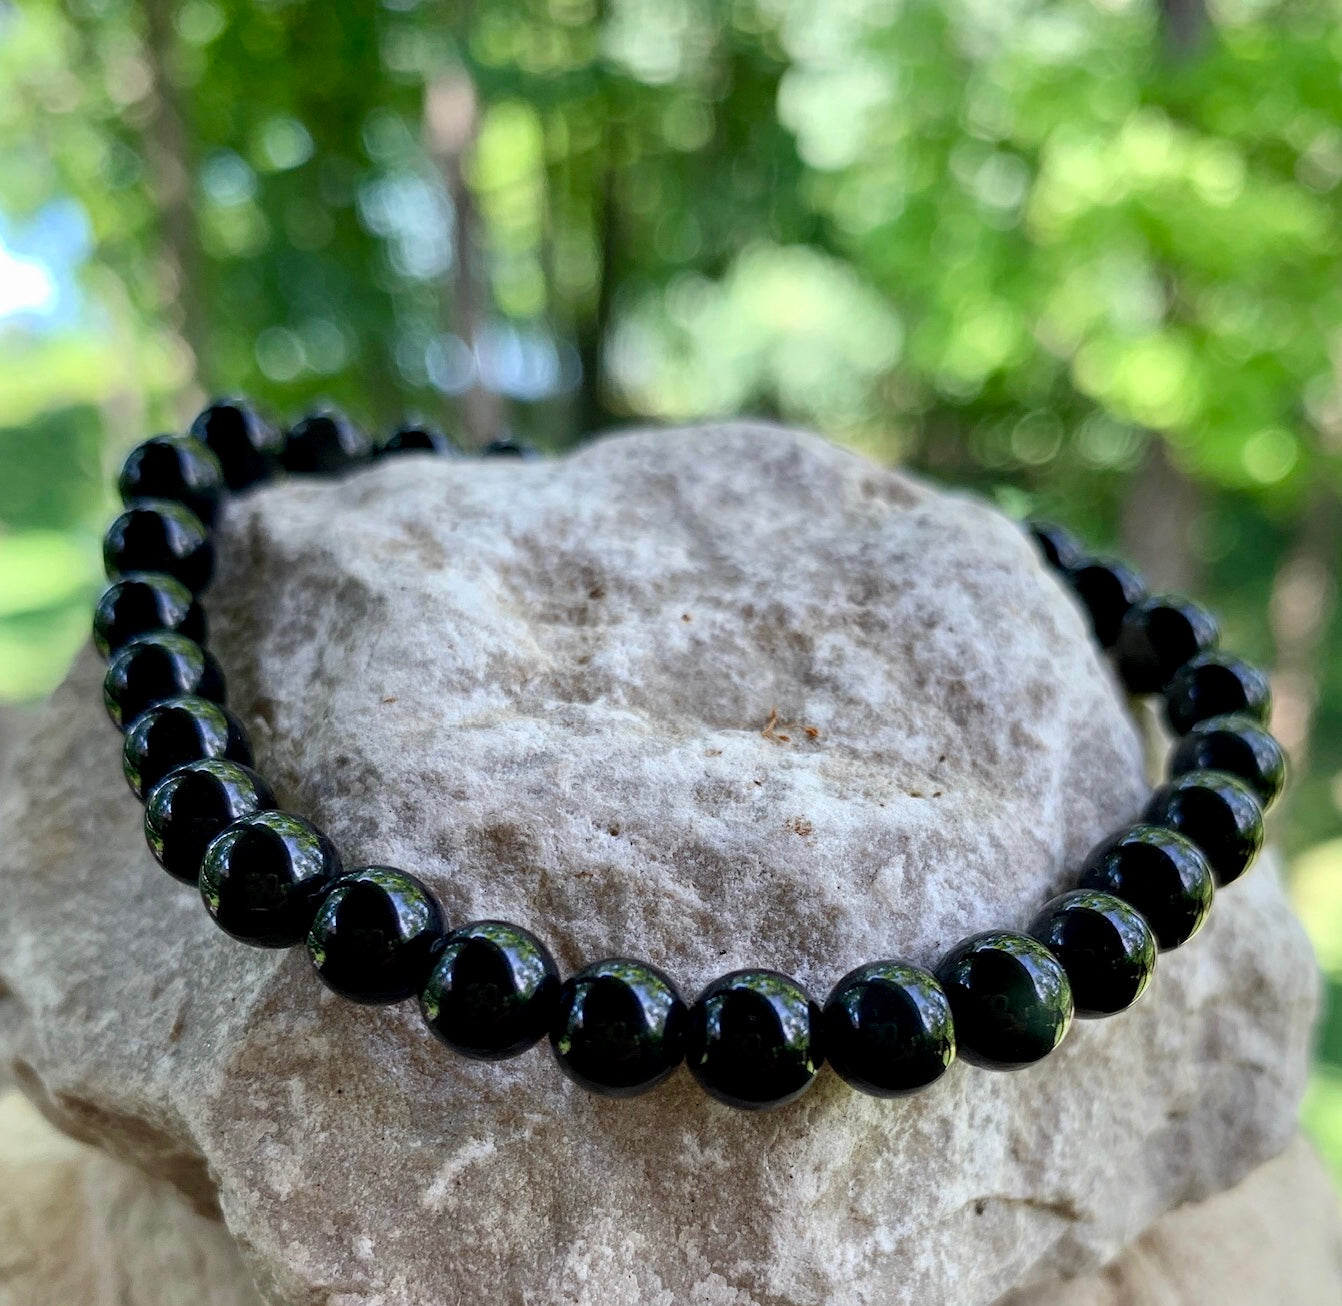 Buy Black Obsidian & Green serpentine Bracelet Crystal Stone Essential  Bracelet Round Shape for Reiki Healing and Crystal at Amazon.in